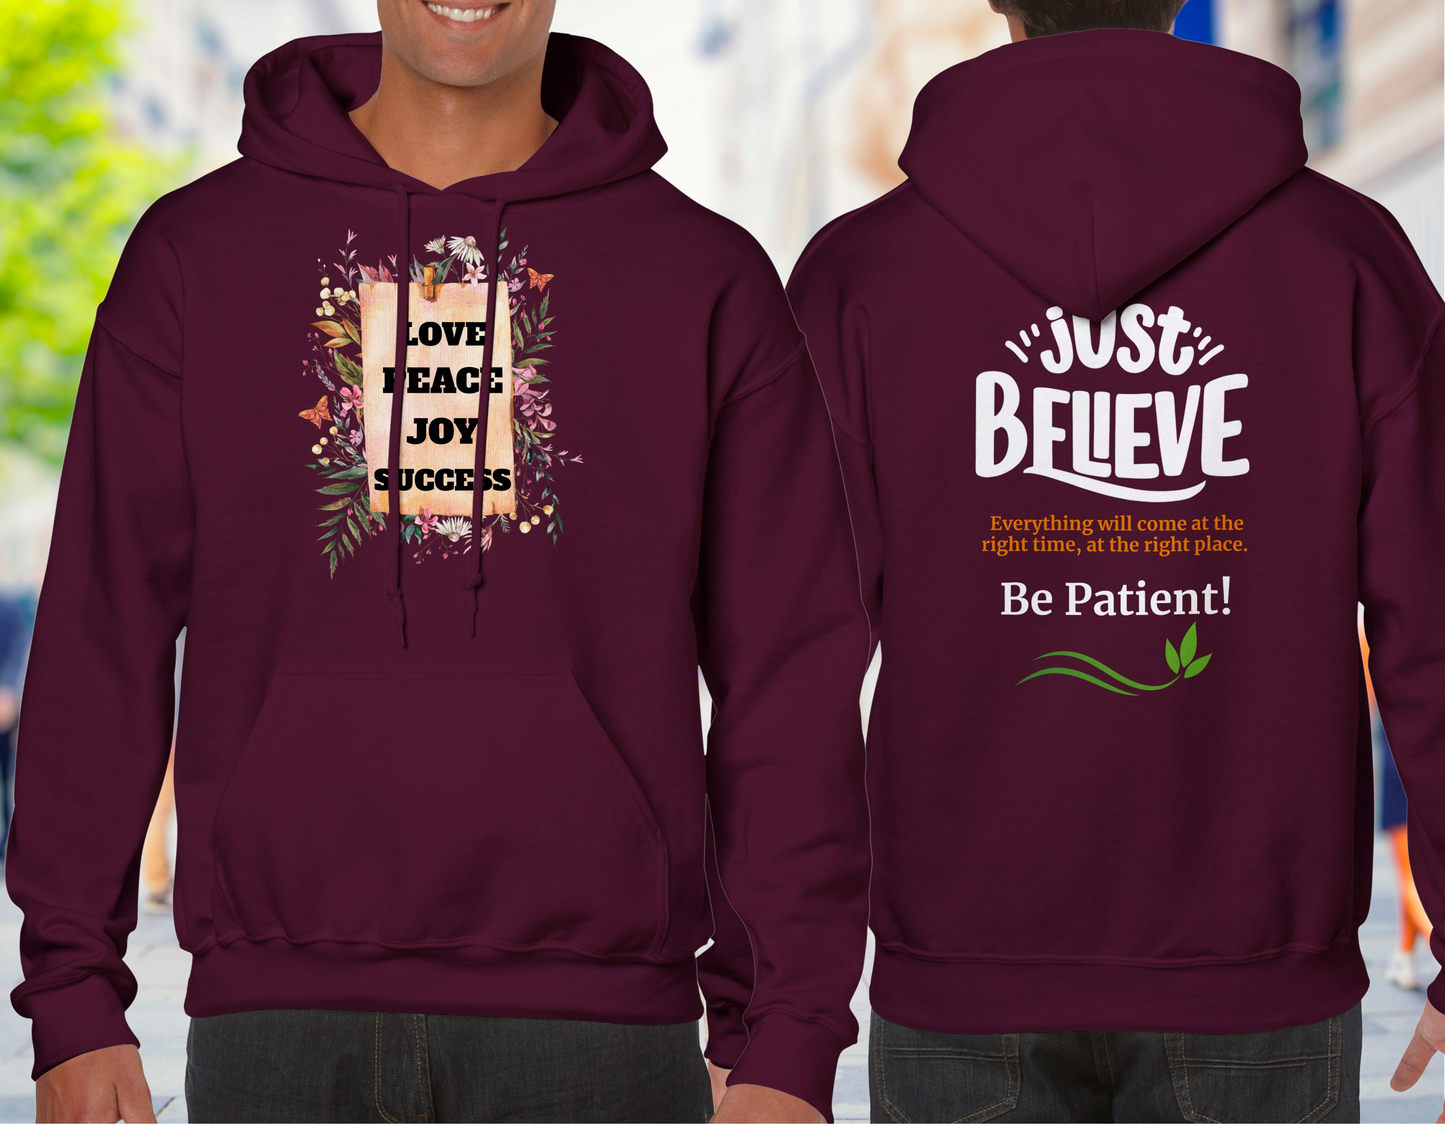 Cottagecore Unisex Hoddie, with positive Words: Love, Peace, Joy and Success. In the back: Just Believe everything will come at the right time and the right place. Be patient!Positive Quote Top, Vintage Jumper Gift Idea - maroon hoodie